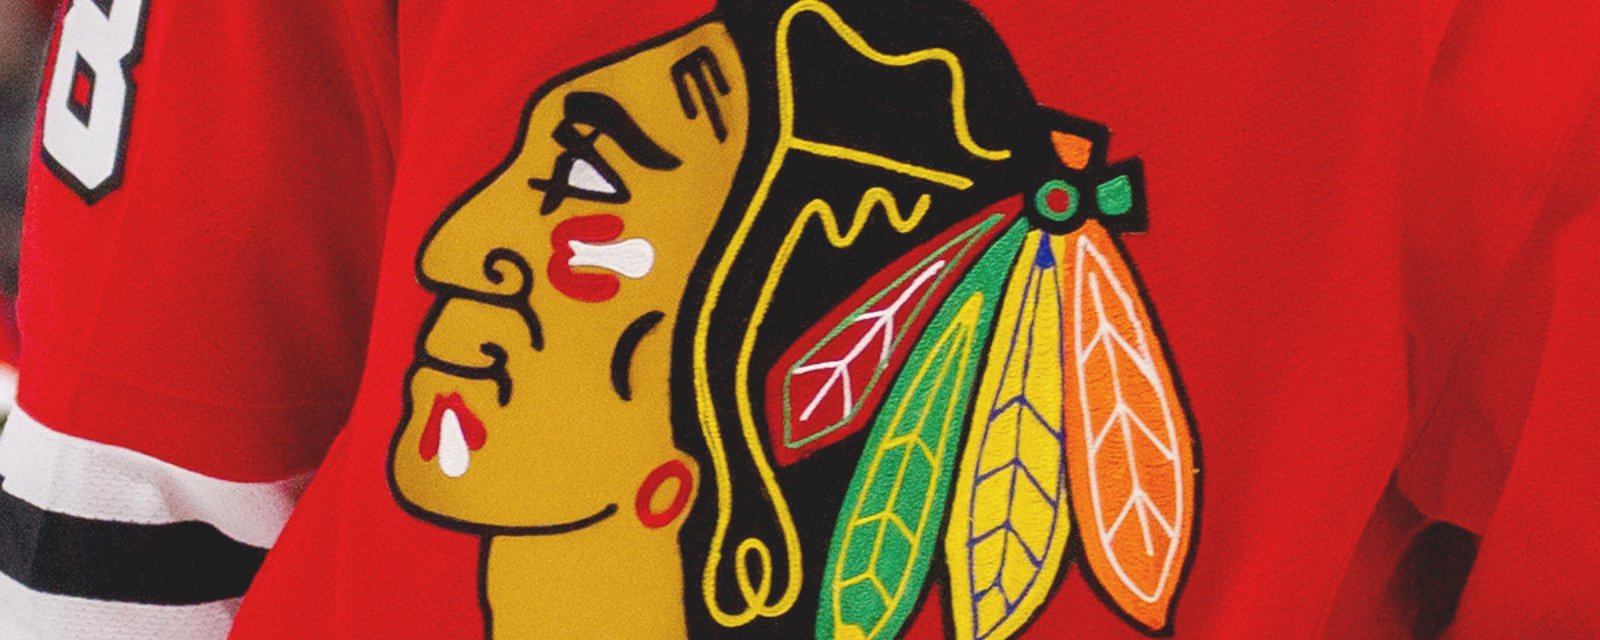 NHL Jersey sales : 2 Hawks players among the top 15.